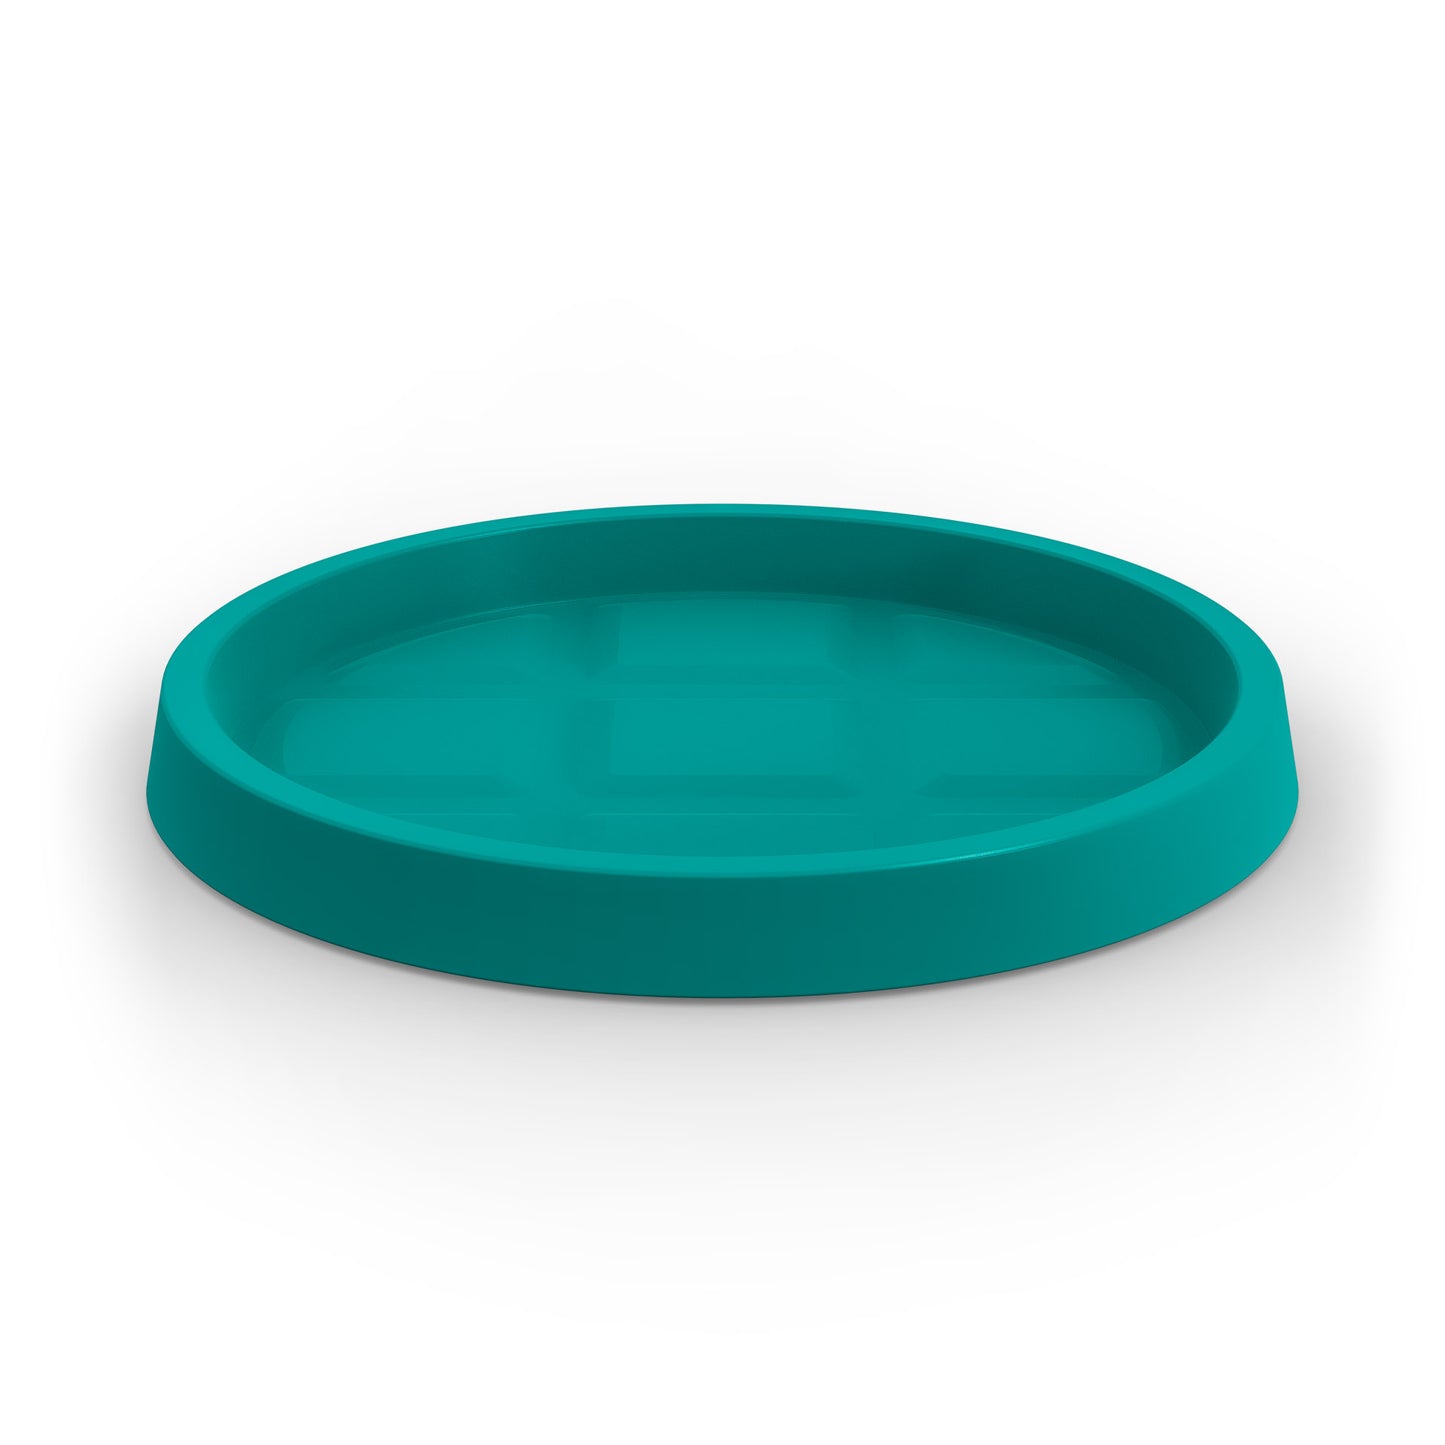 A large teal saucer for Modscene planters. Made in New Zealand.